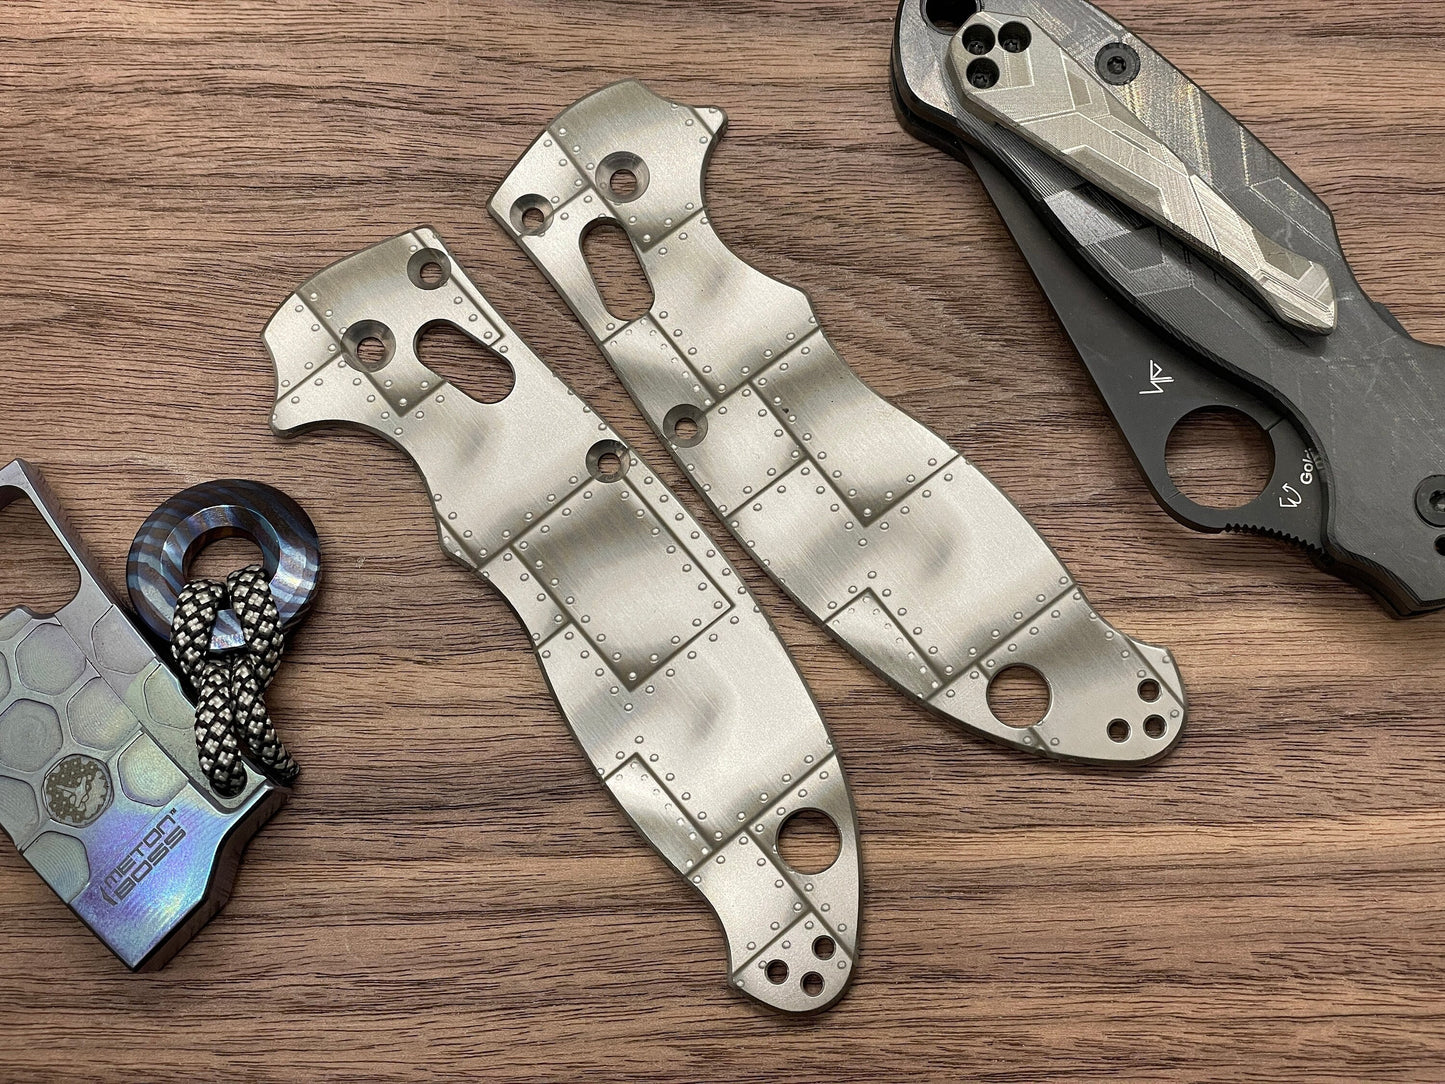 RIVETED engraved Titanium scales for Spyderco MANIX 2